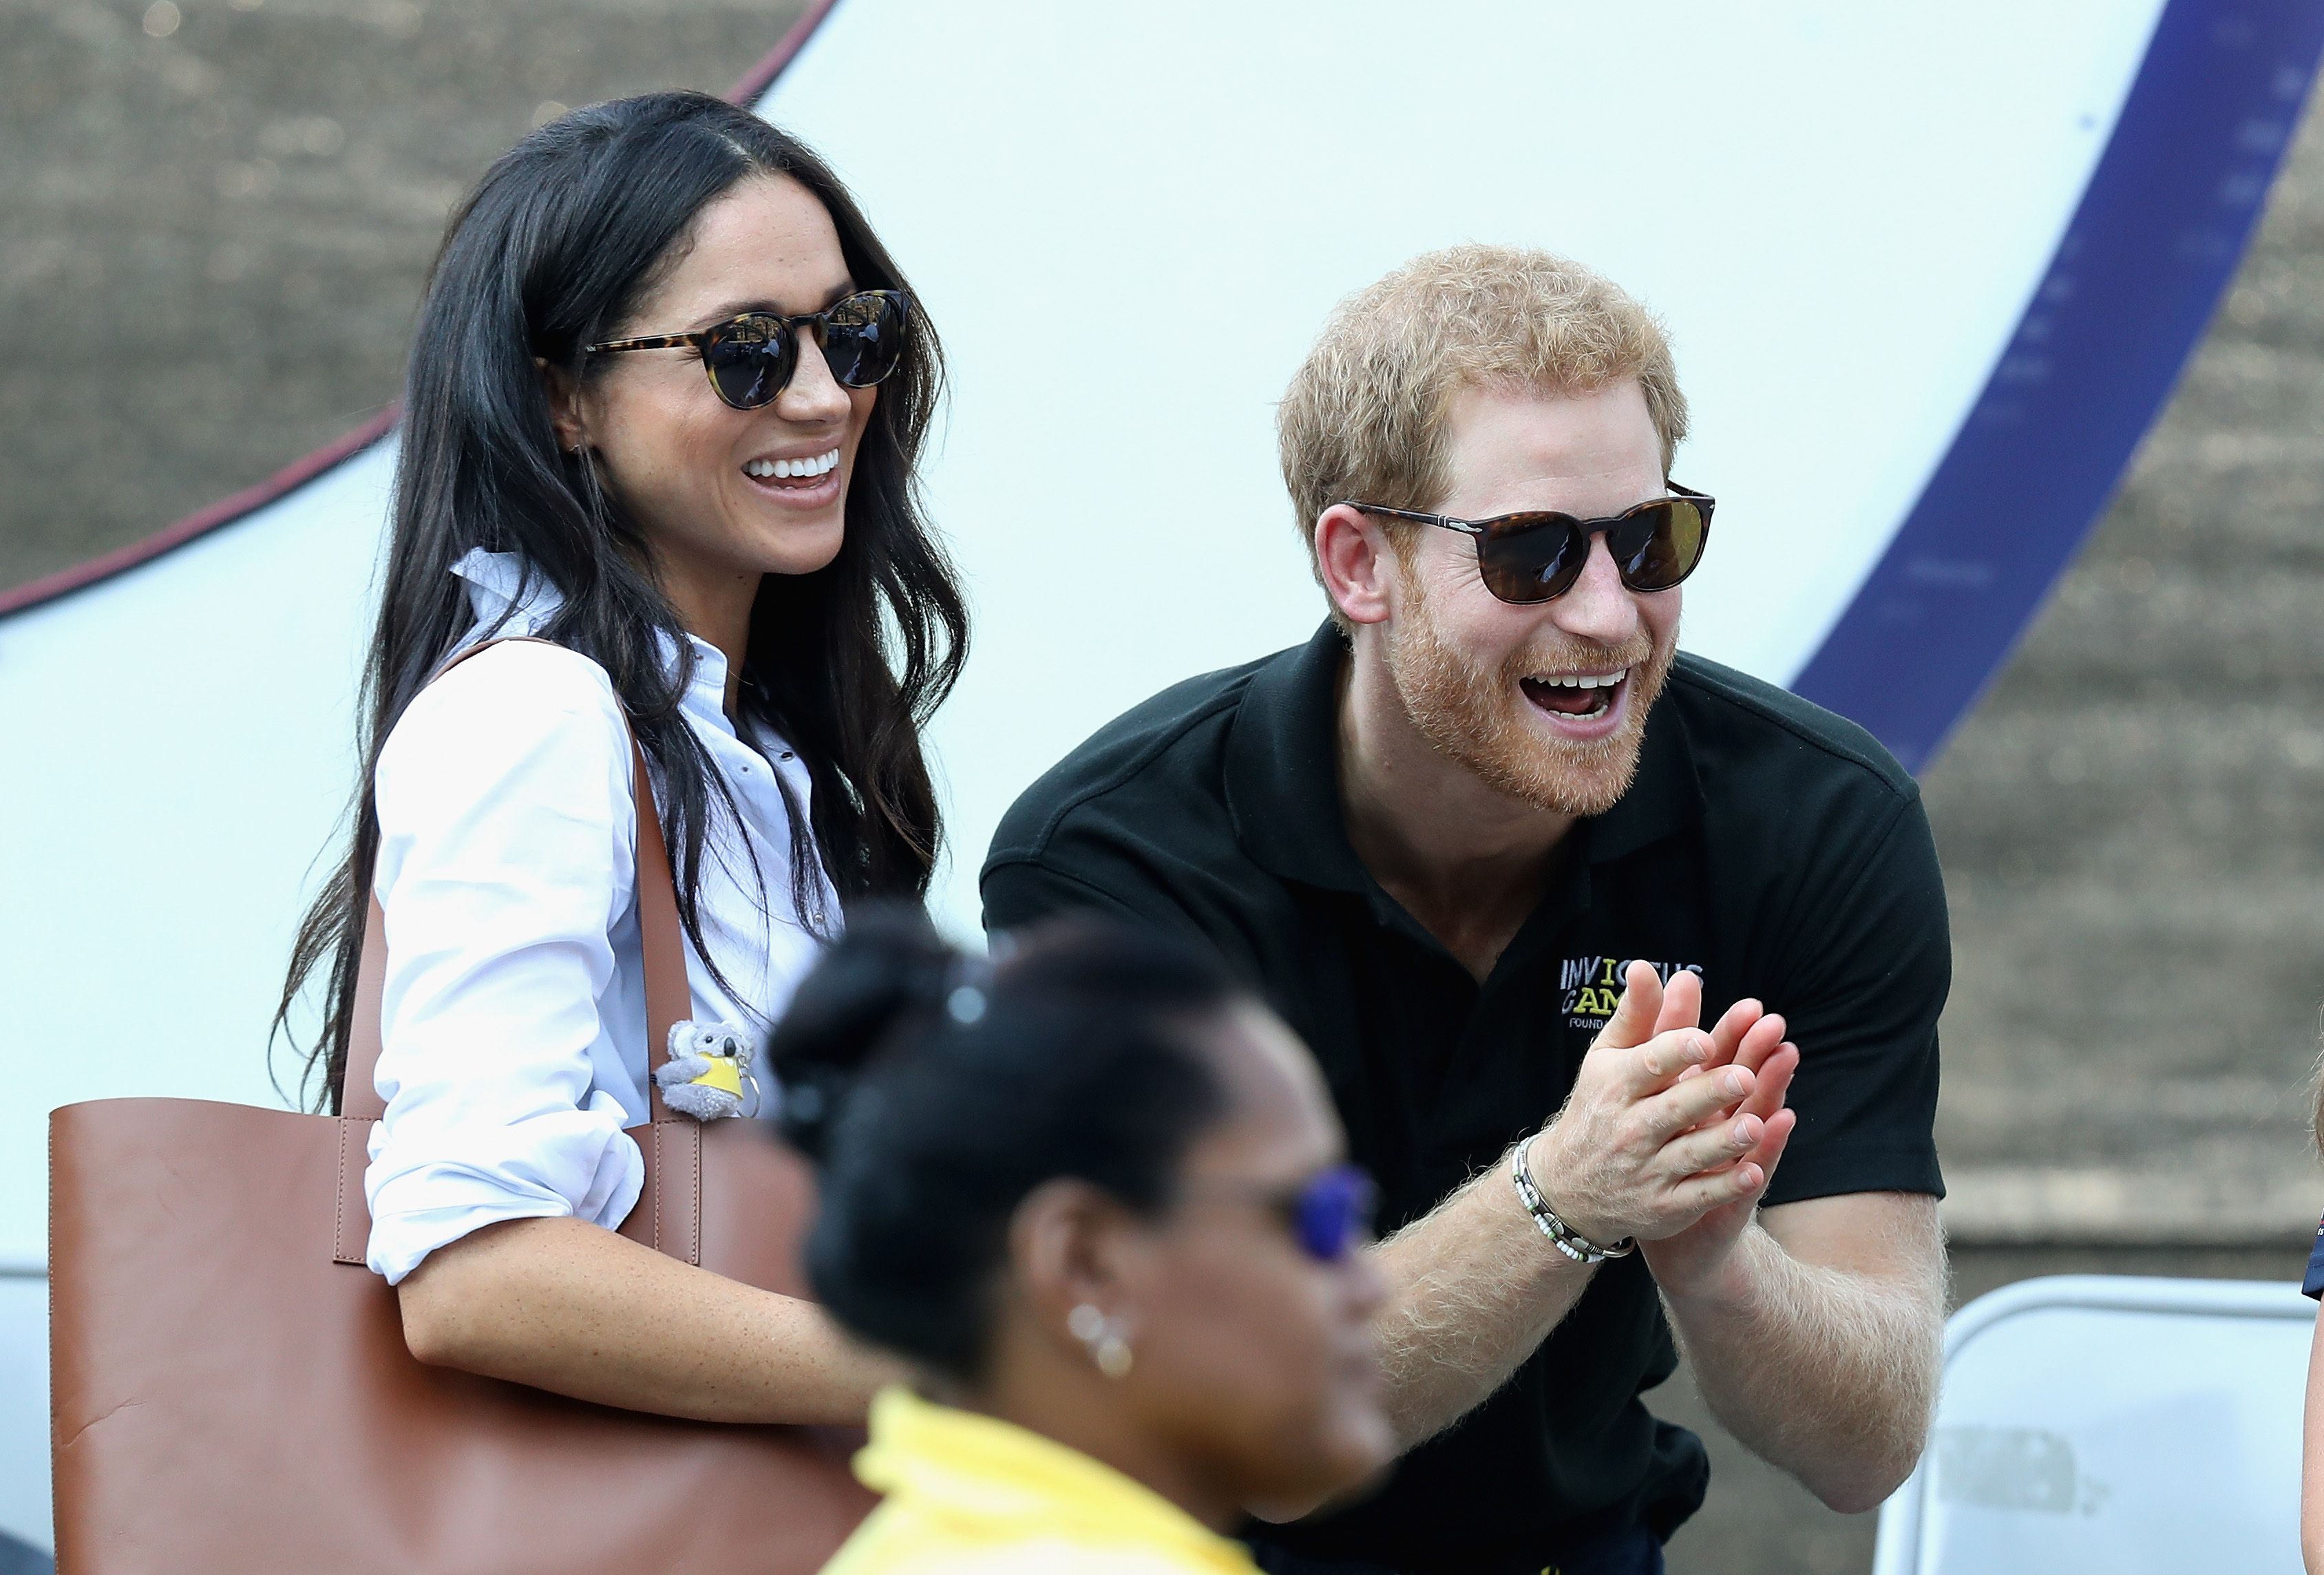 Prince Harry  and Meghan Markle during a Wheelchair Tennis match during the Invictus Games 2017 at Nathan Philips Square on September 25, 2017 in Toronto, Canada. | Source: Getty Images